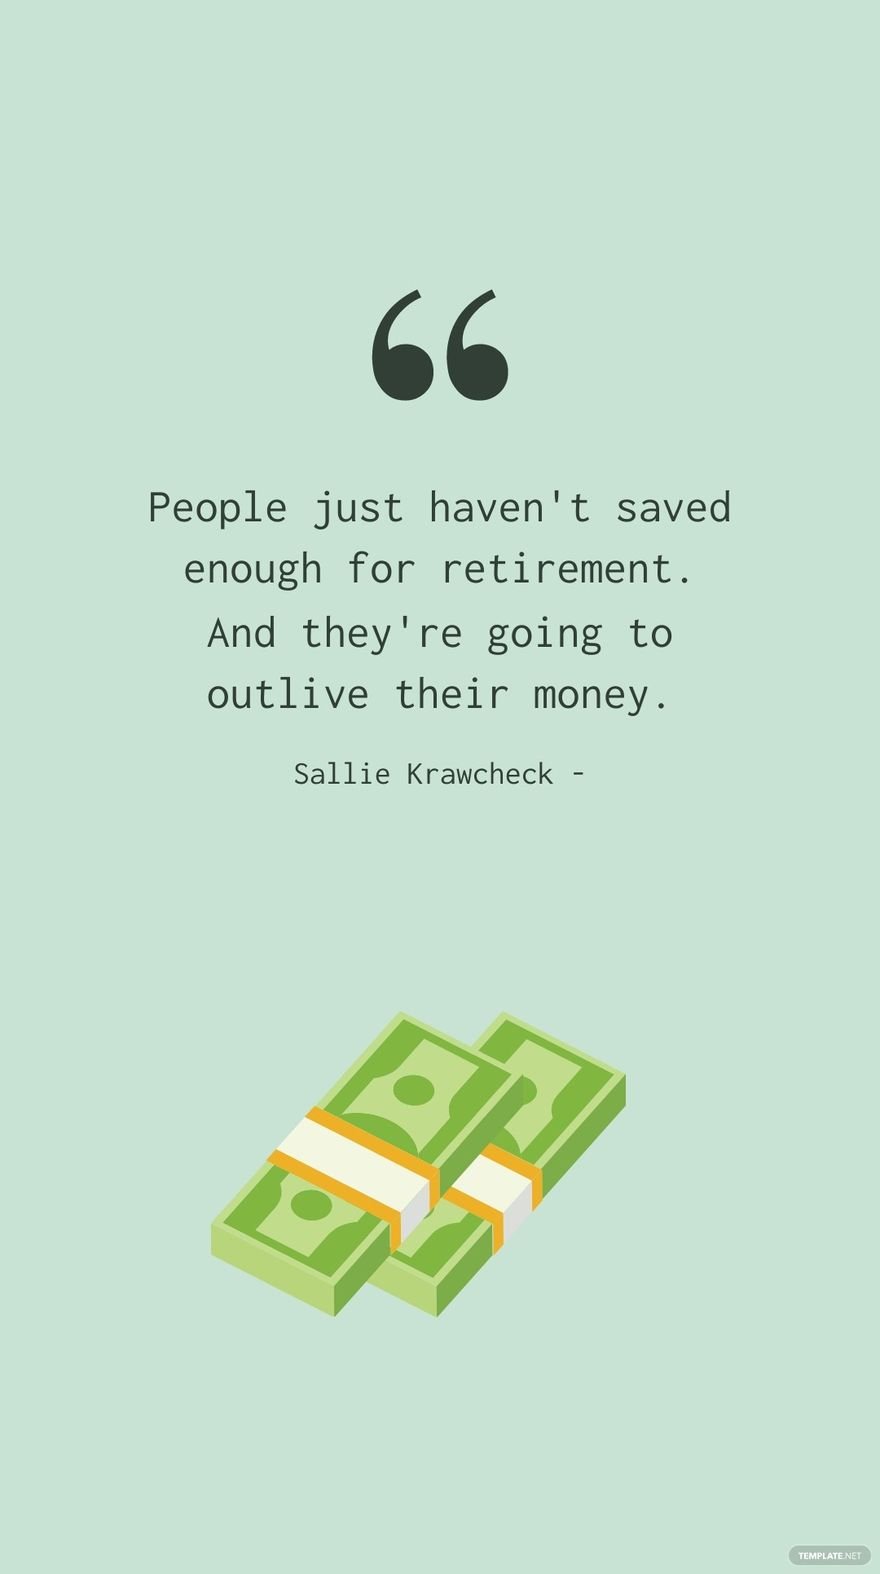 Free Sallie Krawcheck - People just haven't saved enough for retirement. And they're going to outlive their money.